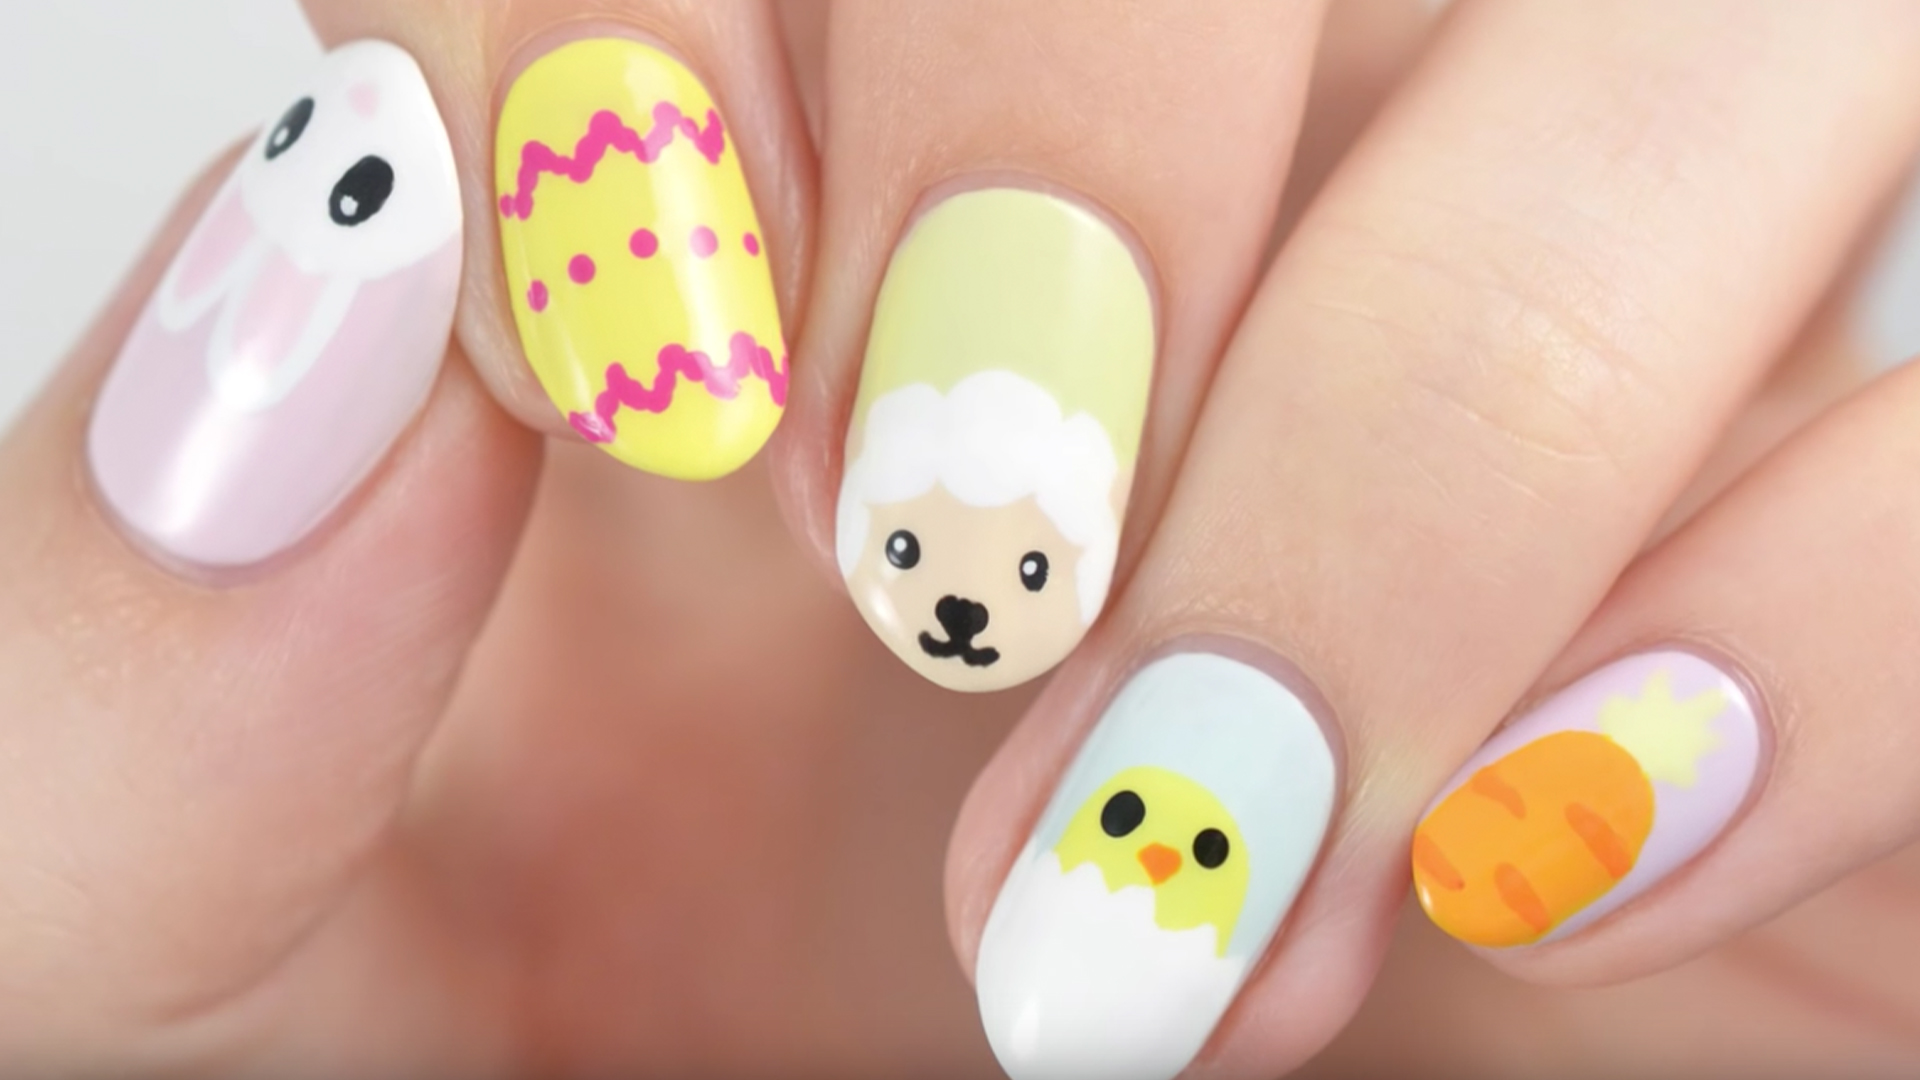 4. Quick and Easy Easter Nail Art - wide 4